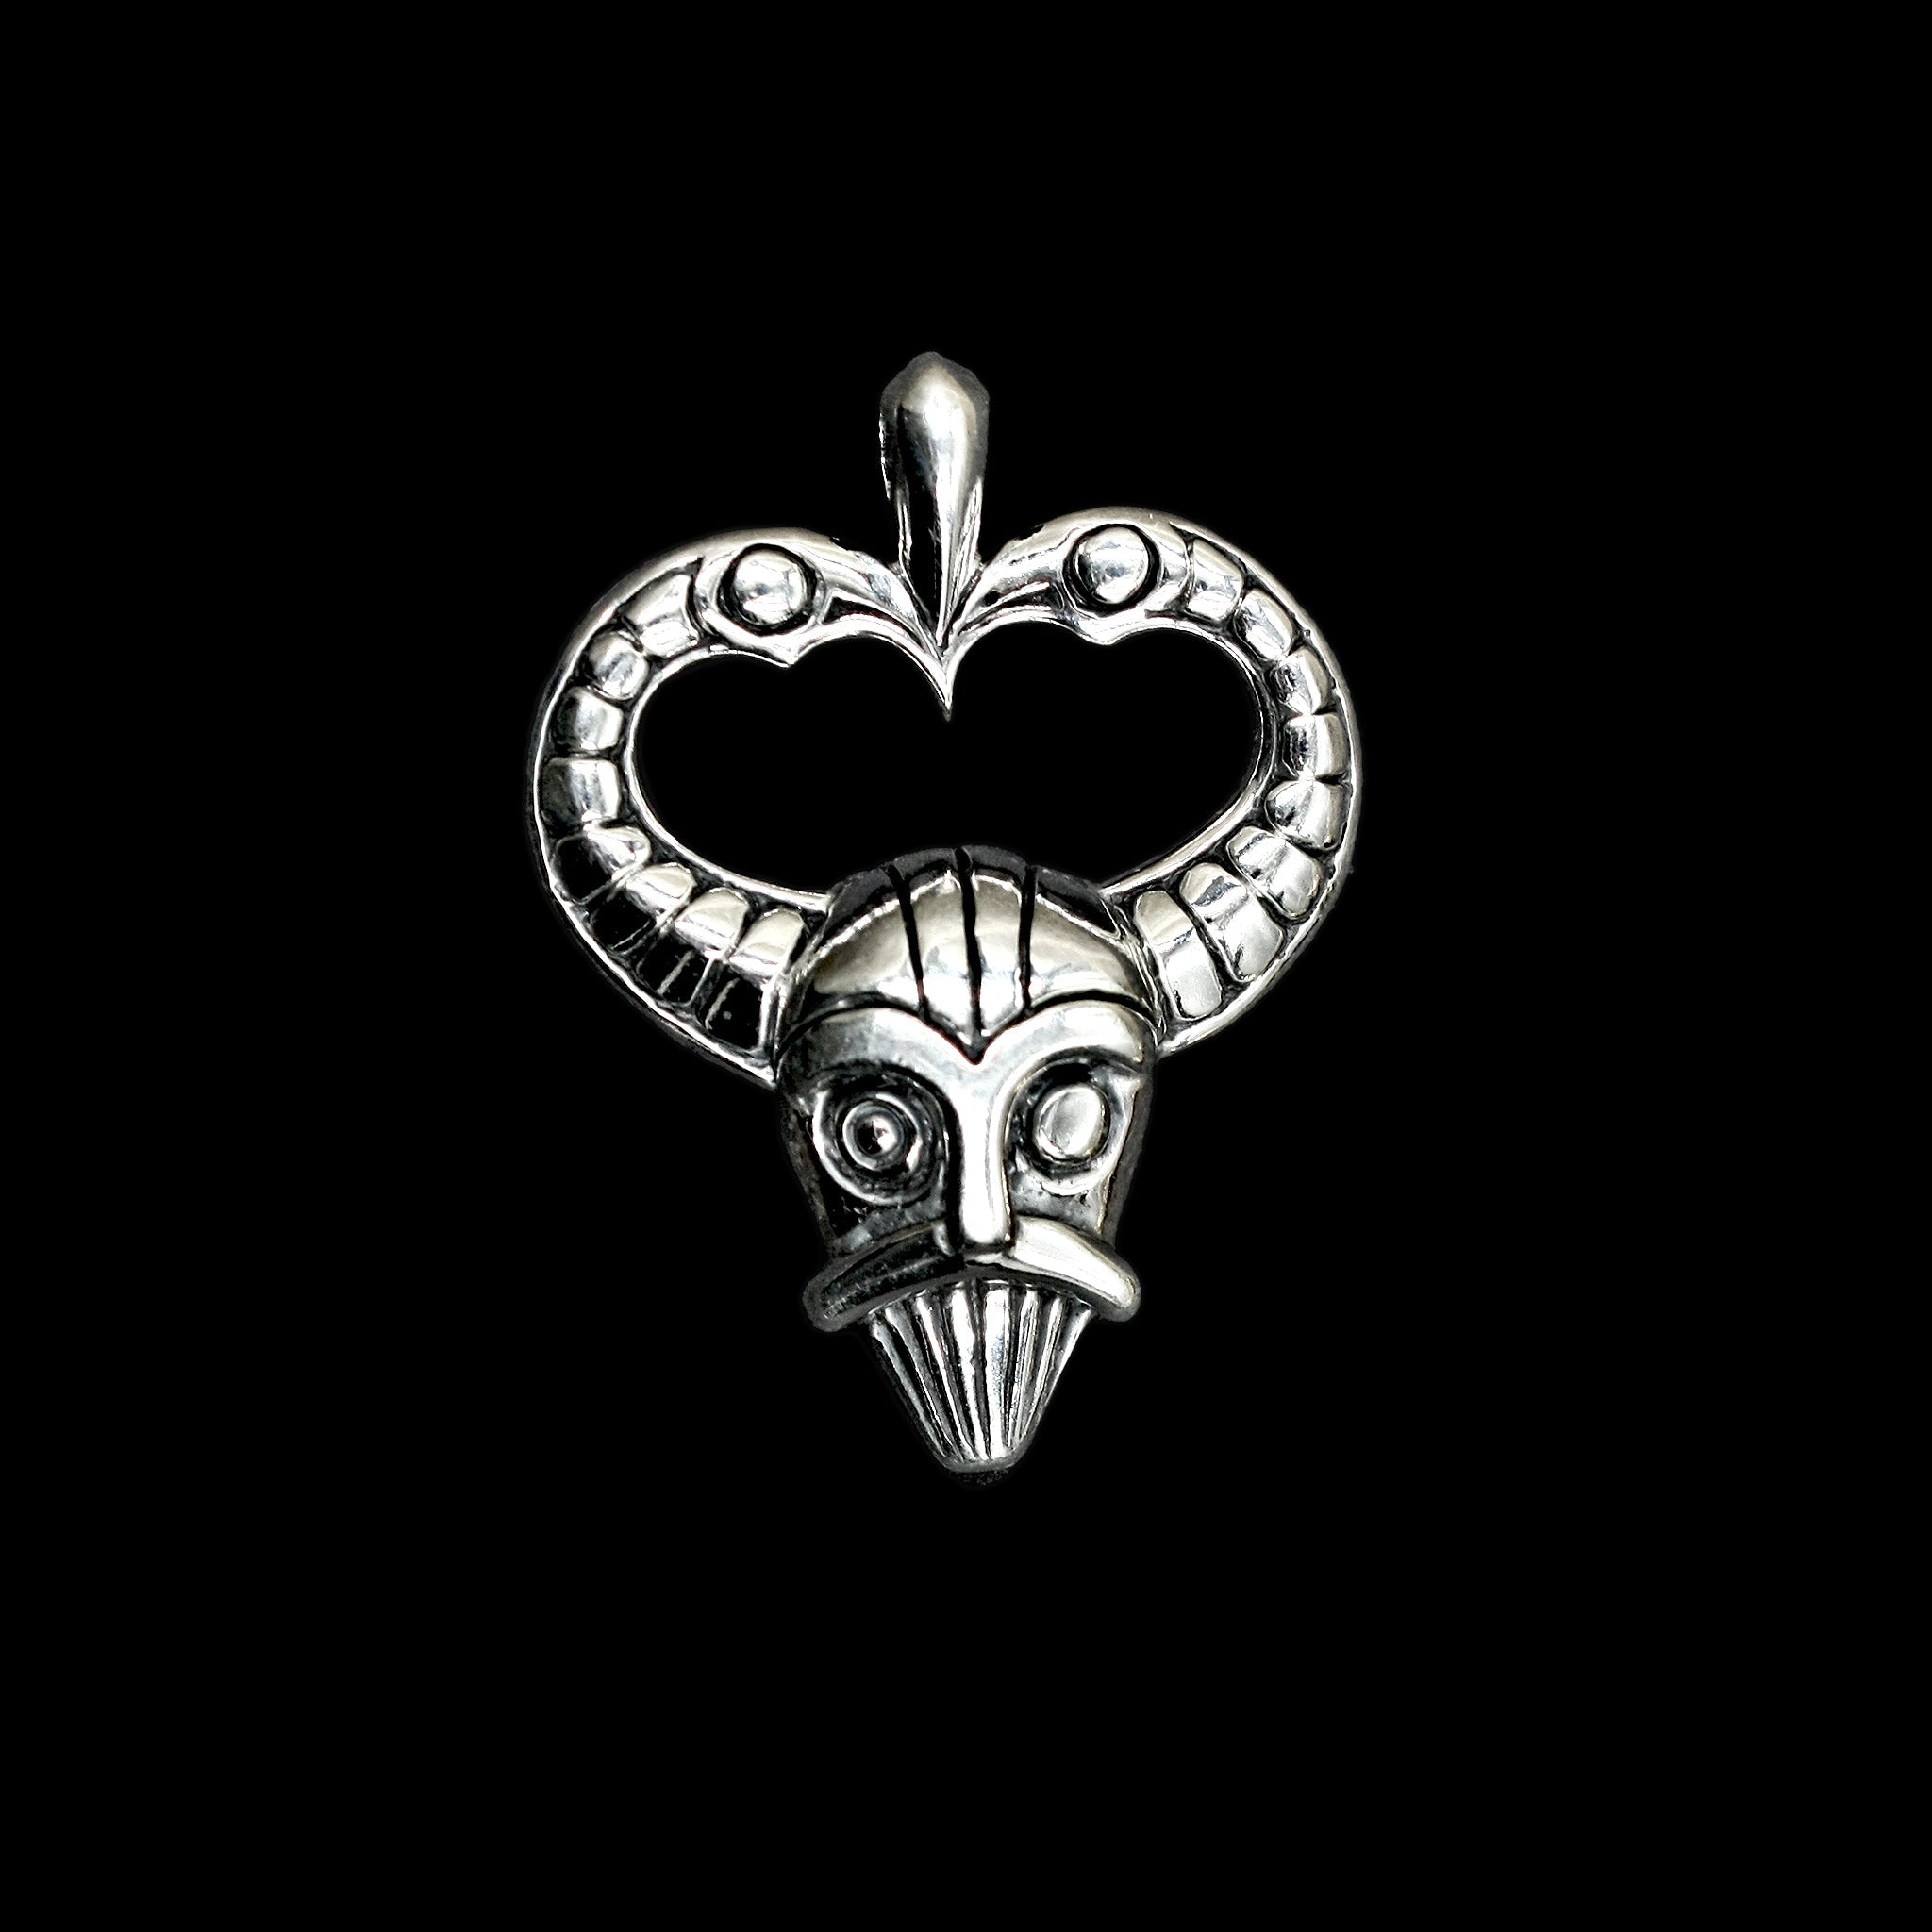 Odin Mask Pendant with Twin Raven Horns - Silver